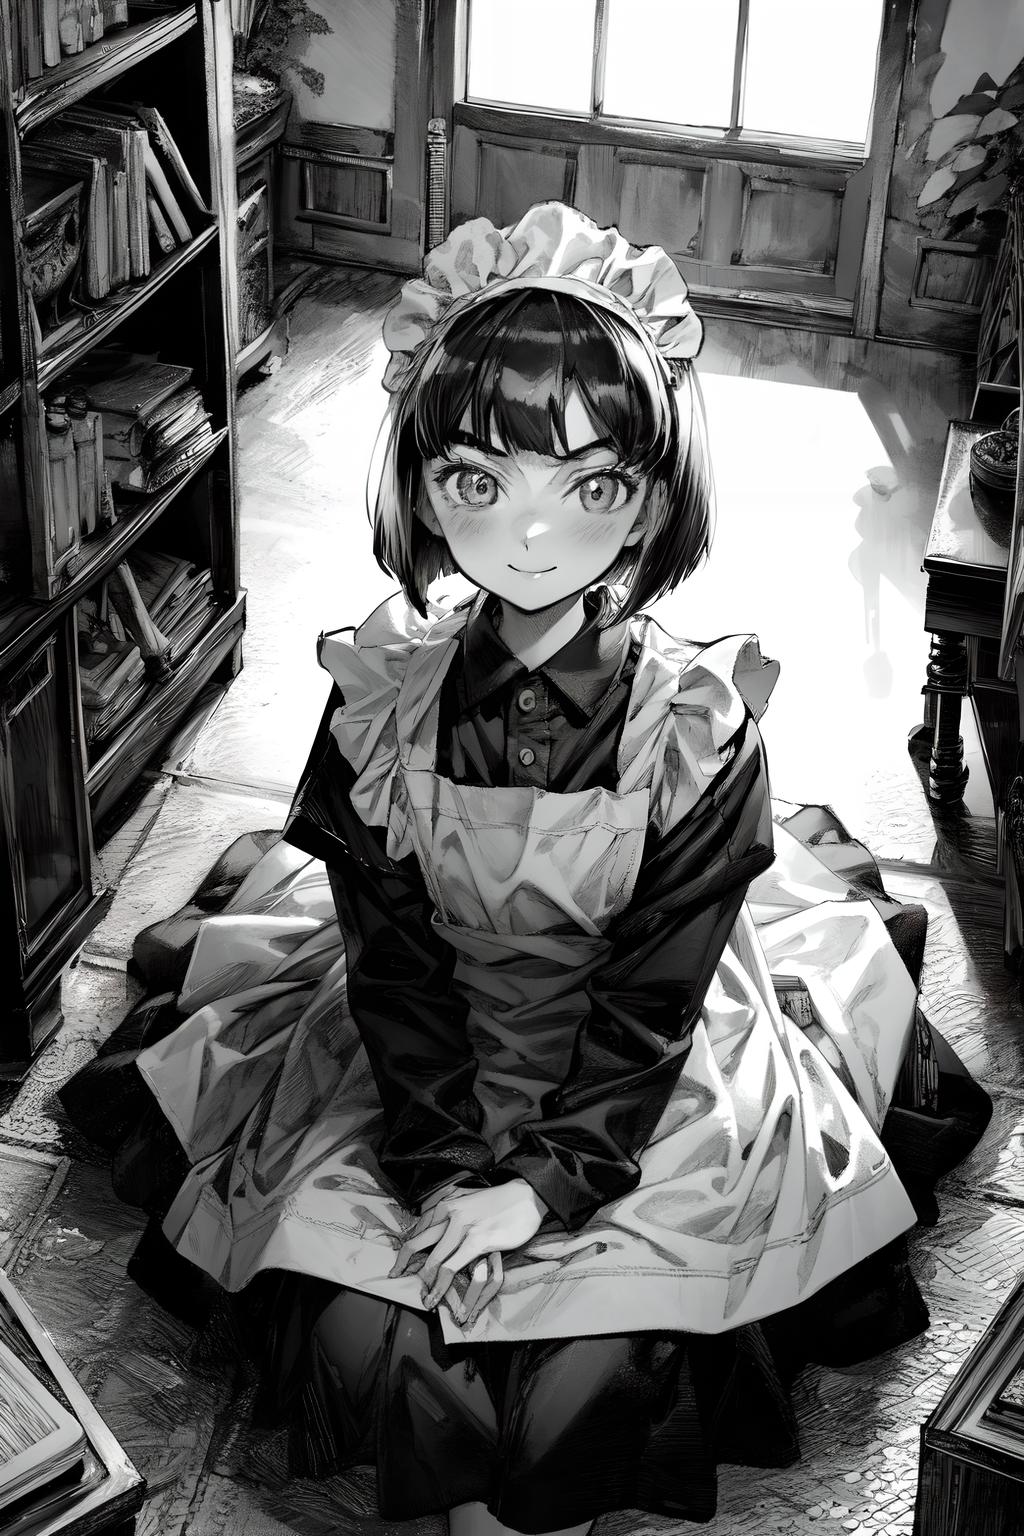 A cartoon girl wearing a maid's outfit is sitting on the floor next to a bookshelf.